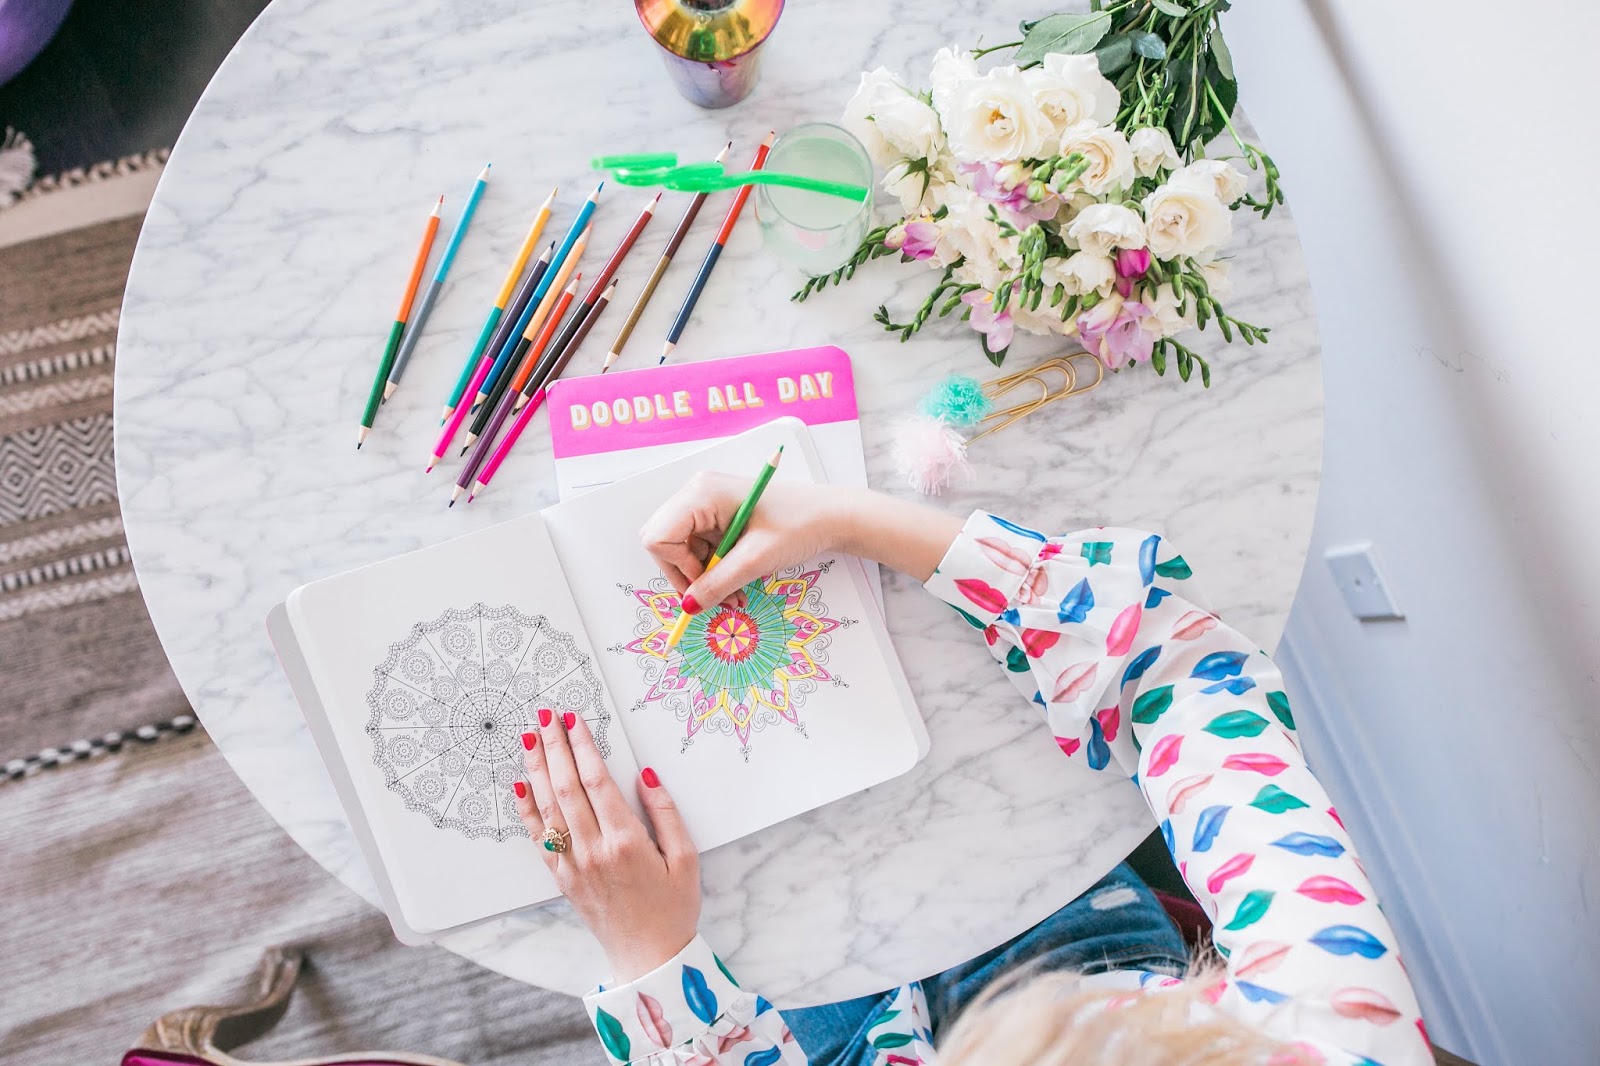 Bijuleni - 3 Quick Steps to Beat the Afternoon Slump, colouring book activities